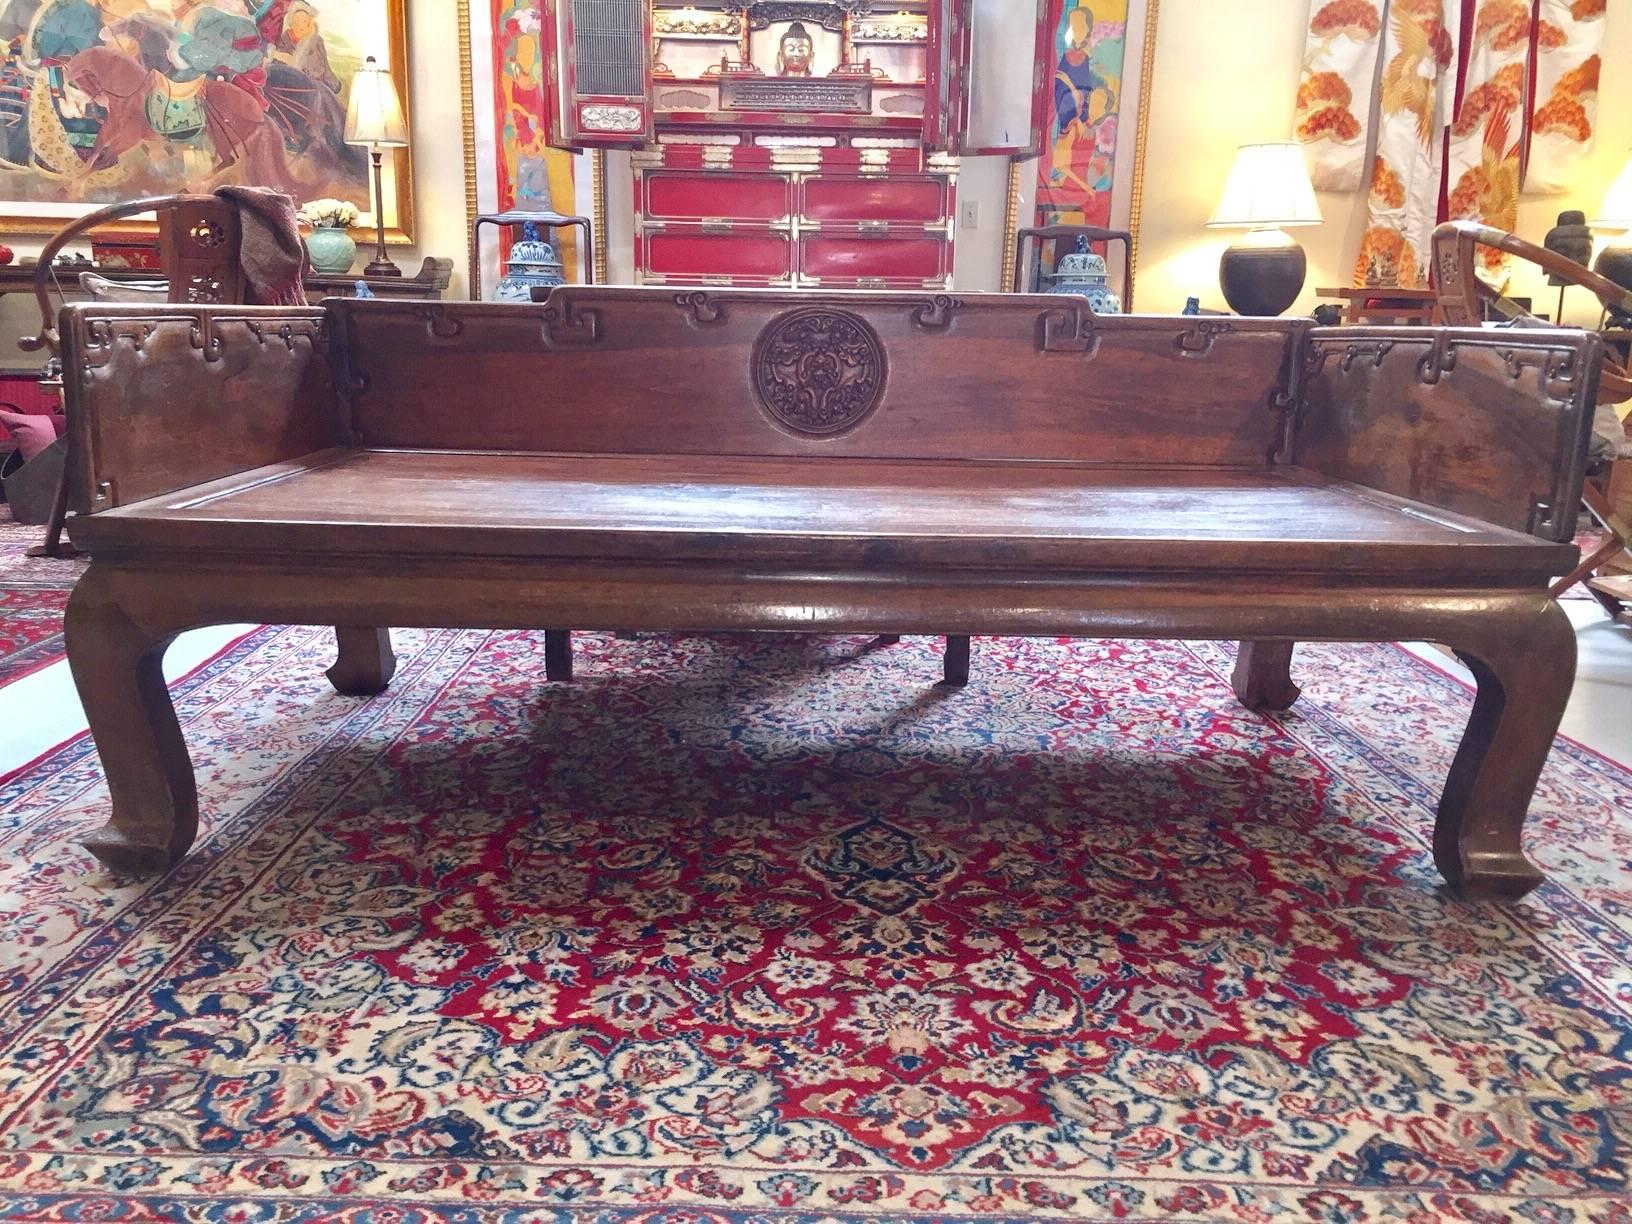 Over 180 years old, this walnut bed would have belonged to a wealthy family as evidenced by both the rich dark walnut wood and detailed carving. The carving includes a medallion on the back board depicting bats (symbols of good fortune in China).